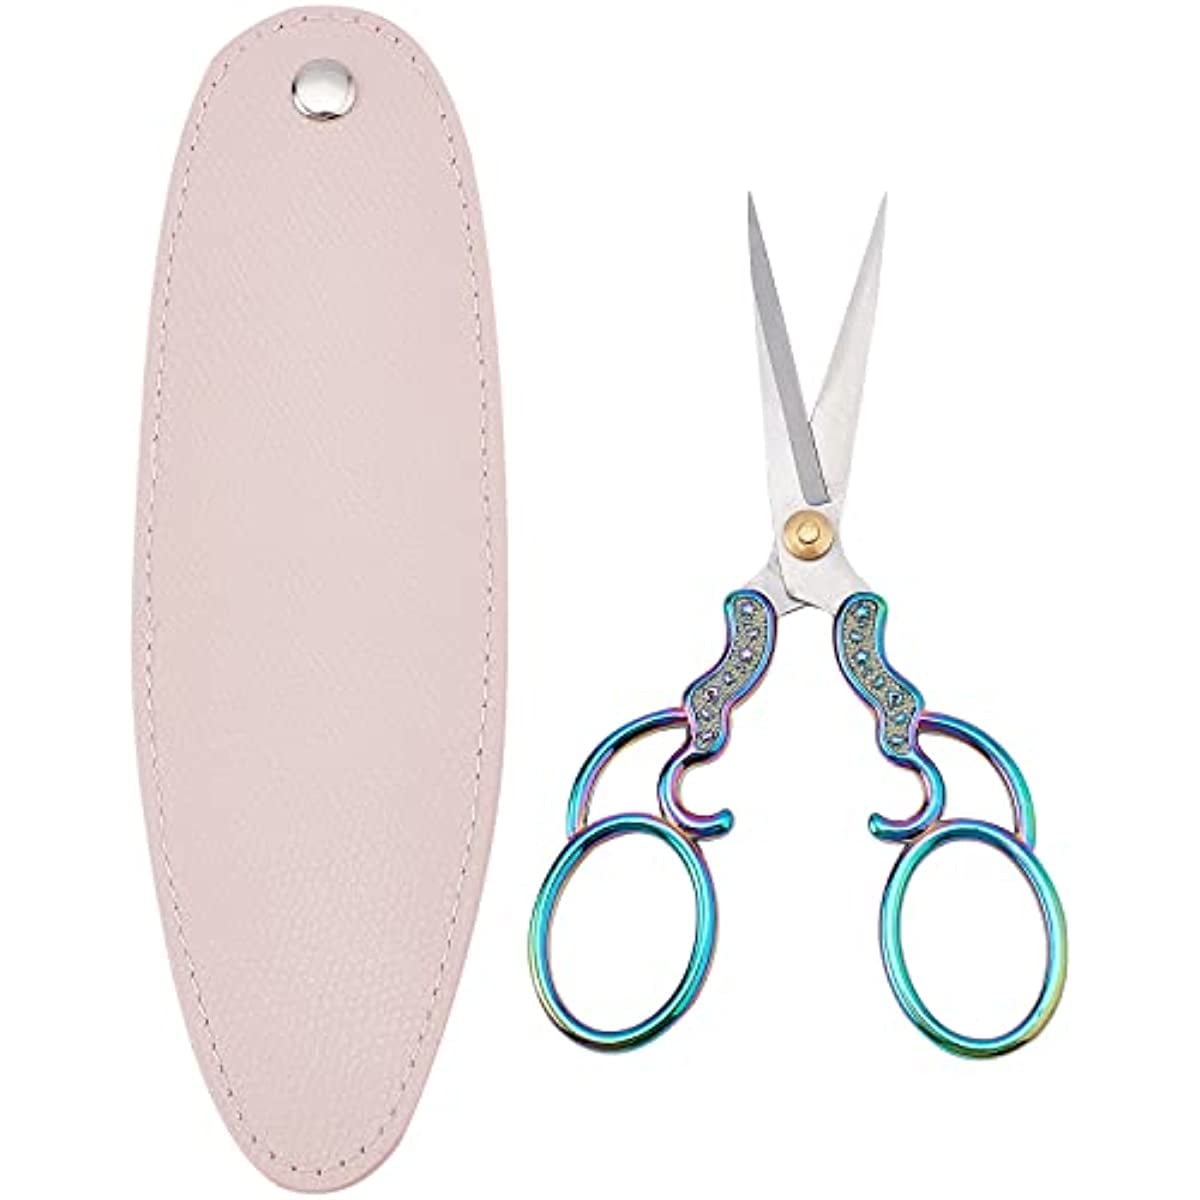 5 Inch Vintage Stainless Steel Knitting Scissors Sharp Tip Sewing Scissors  with Cover Leather Sheath